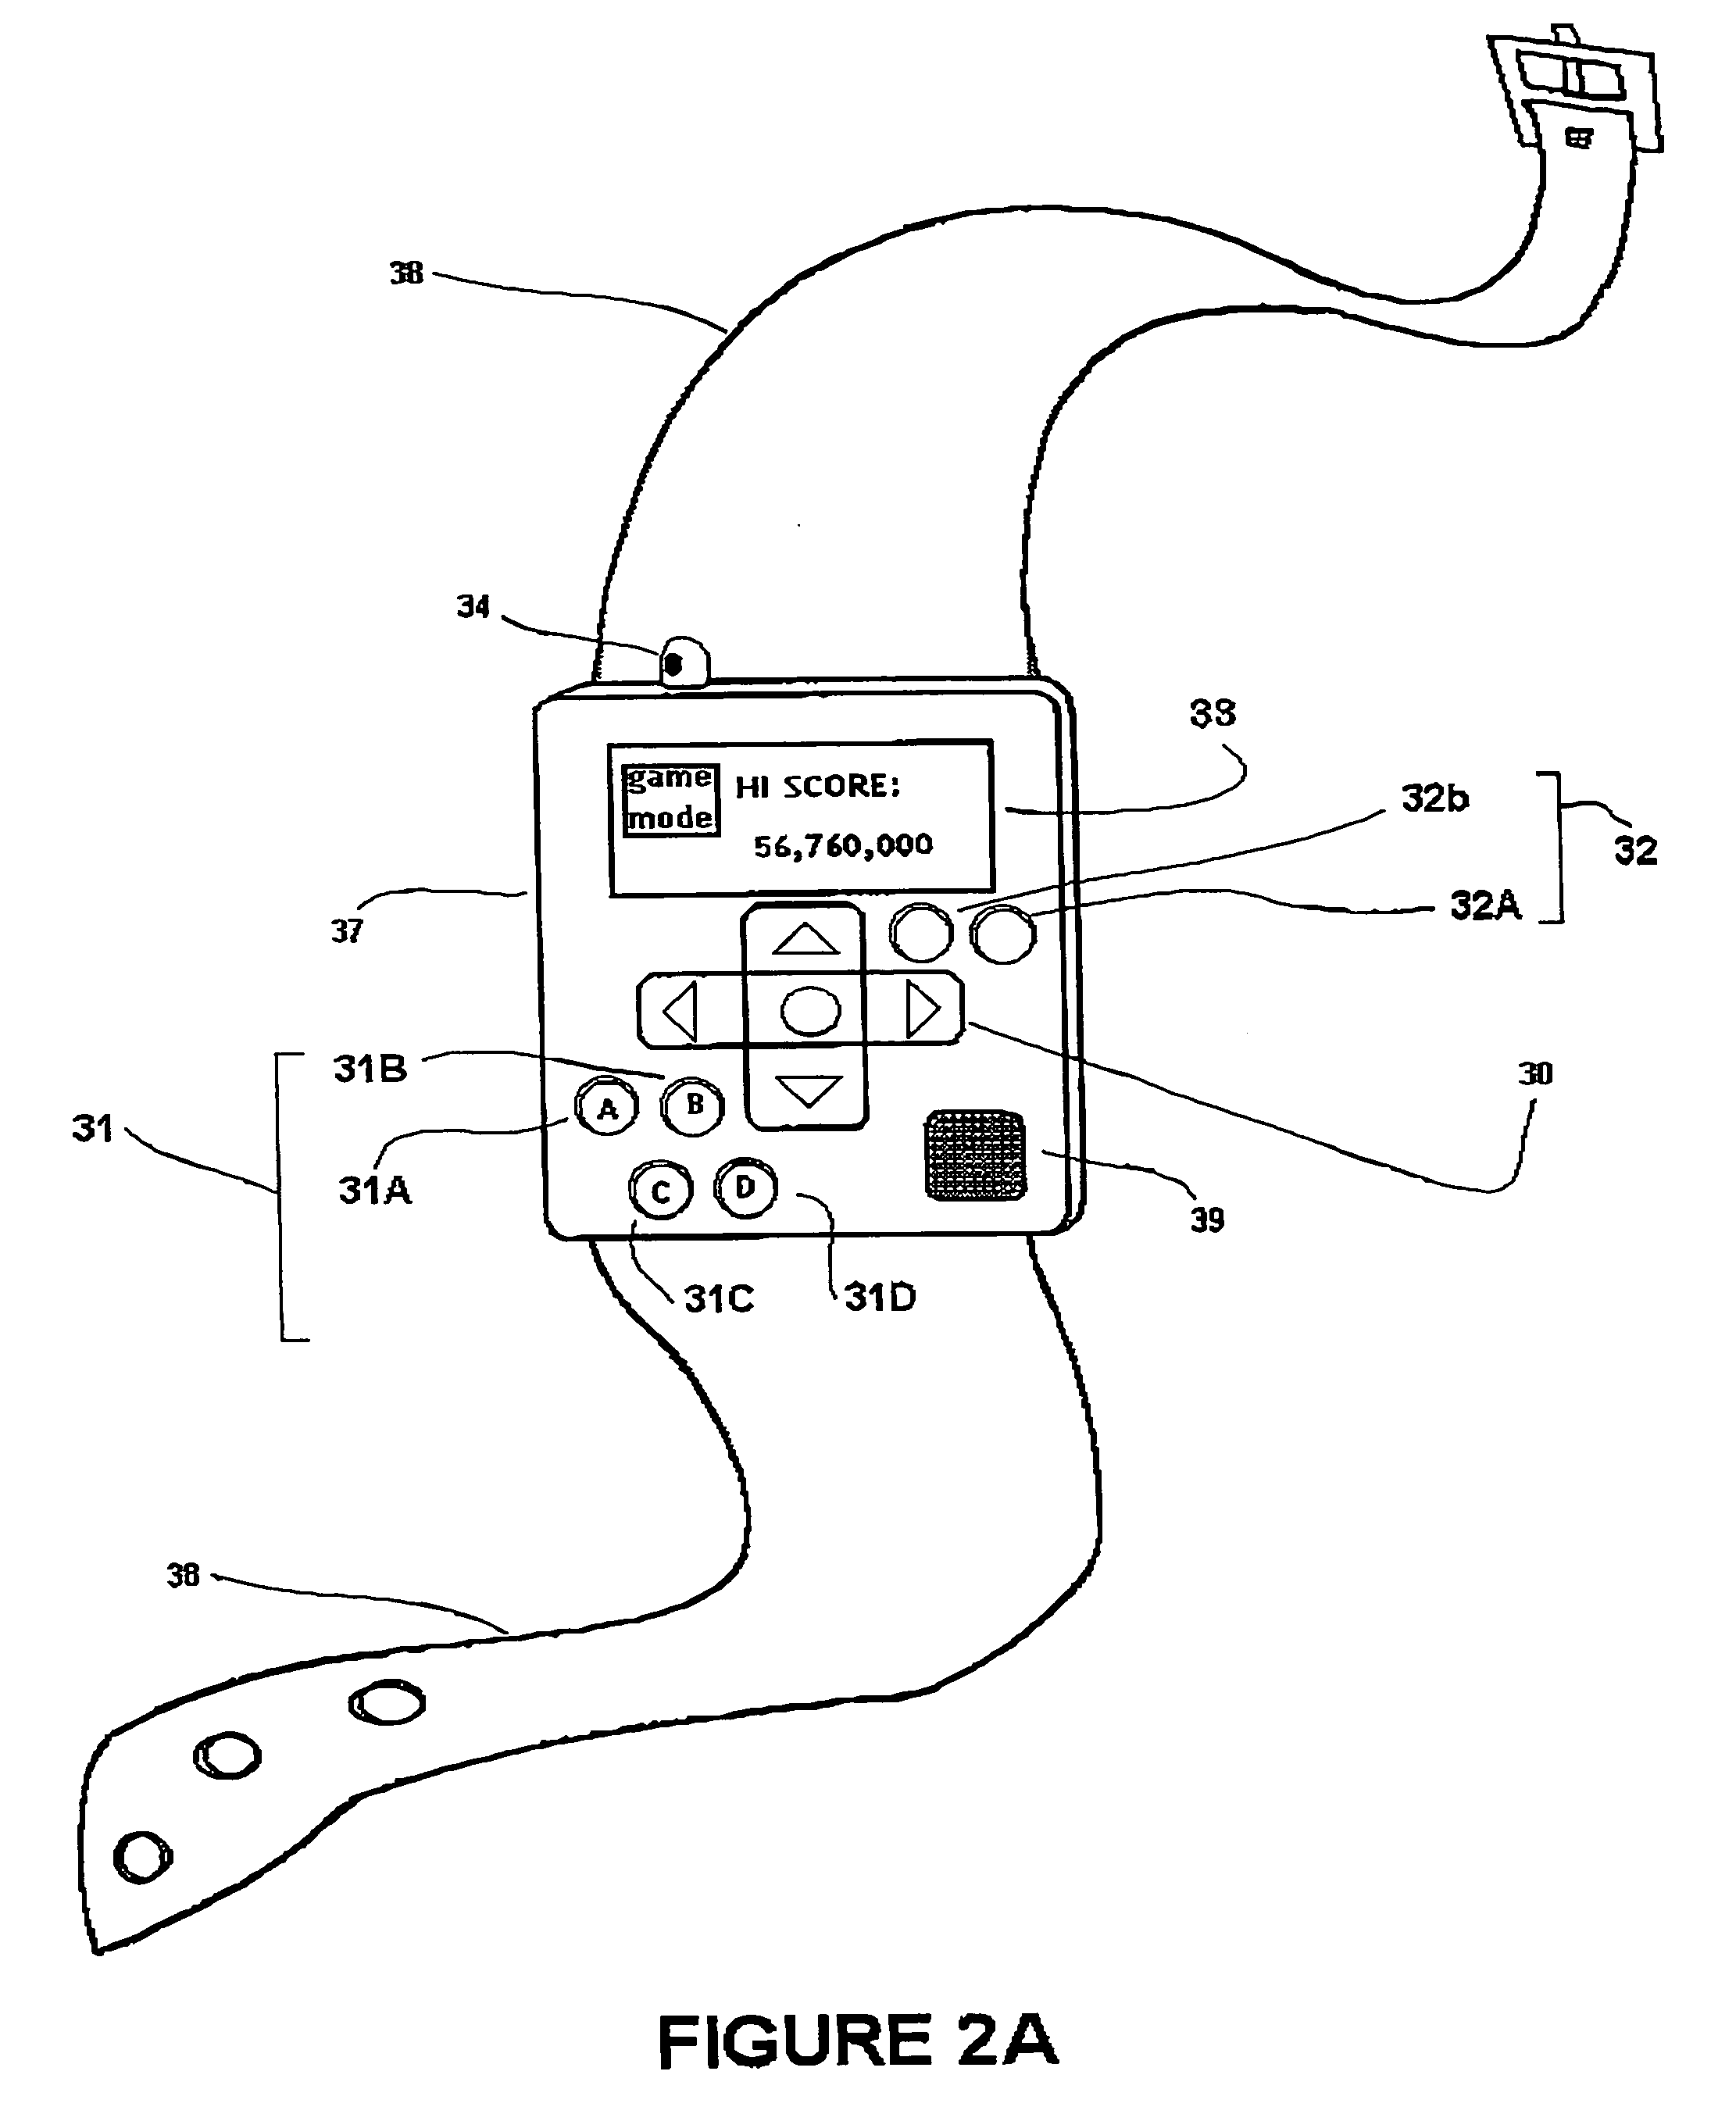 Video game system having dual-function wireless game controller